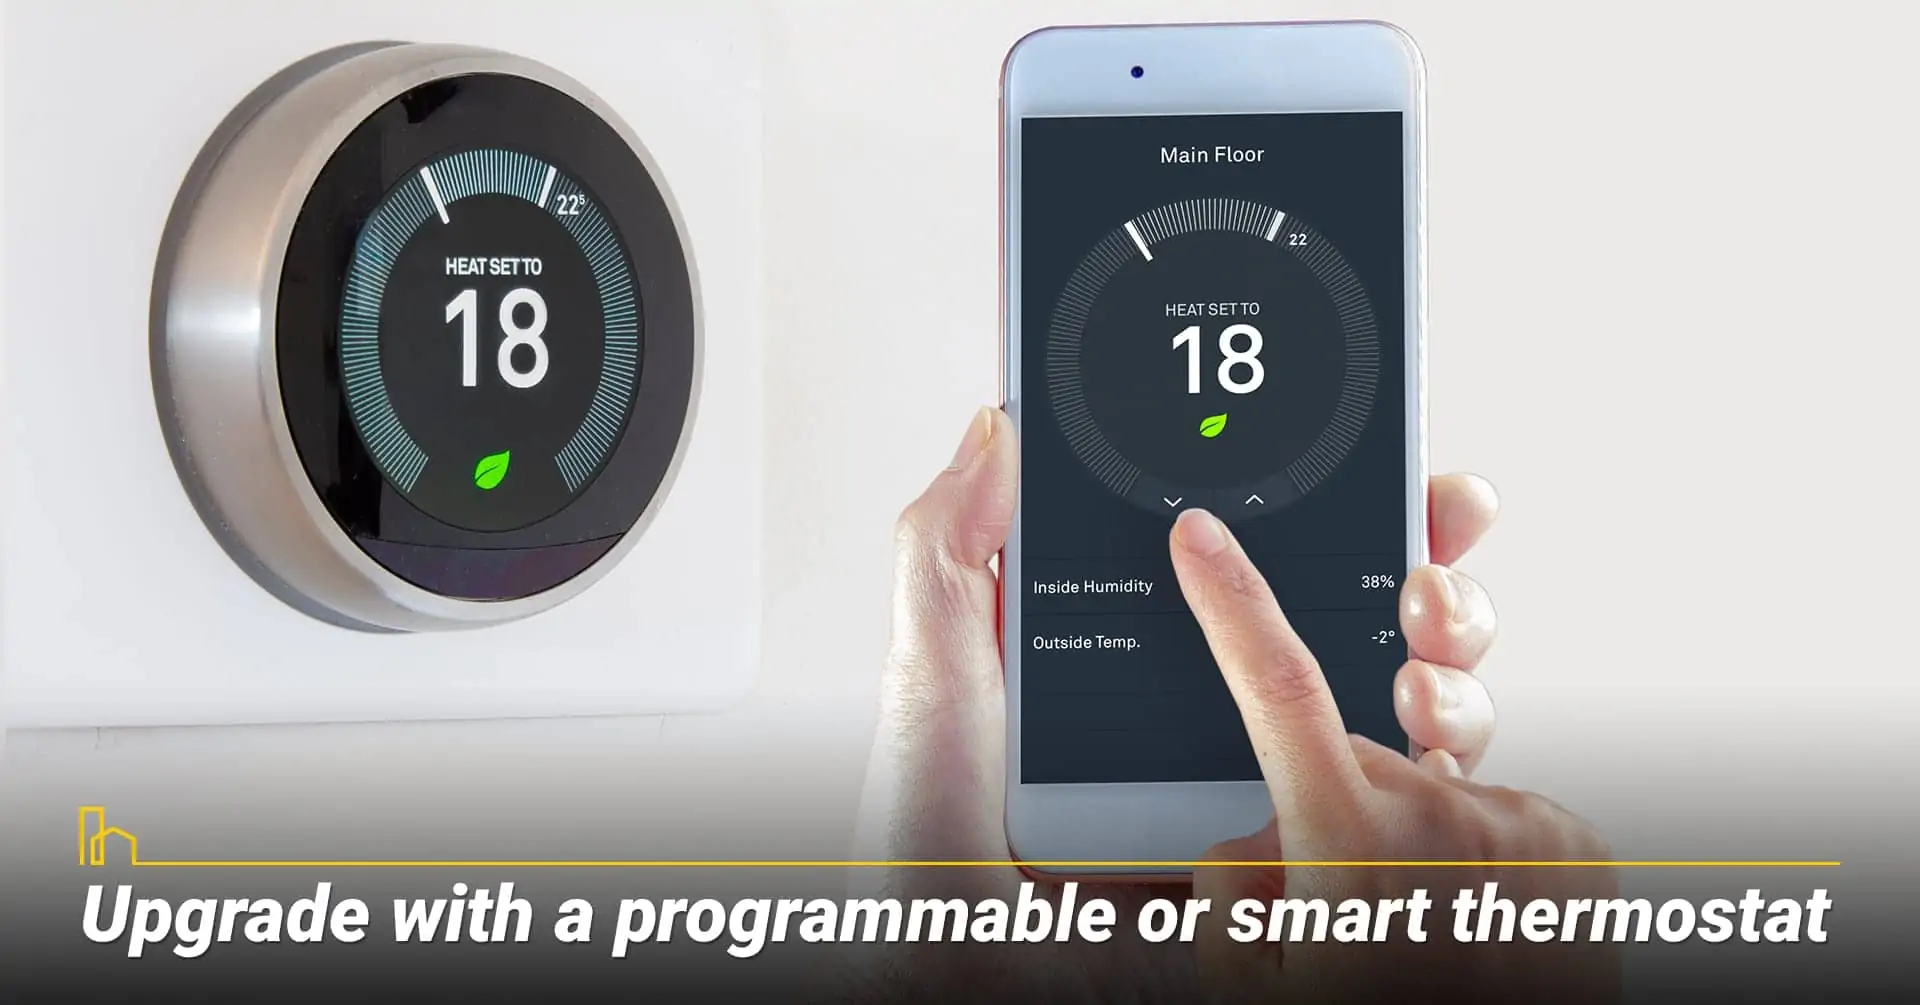 Upgrade with a programmable or smart thermostat, use smart thermostat